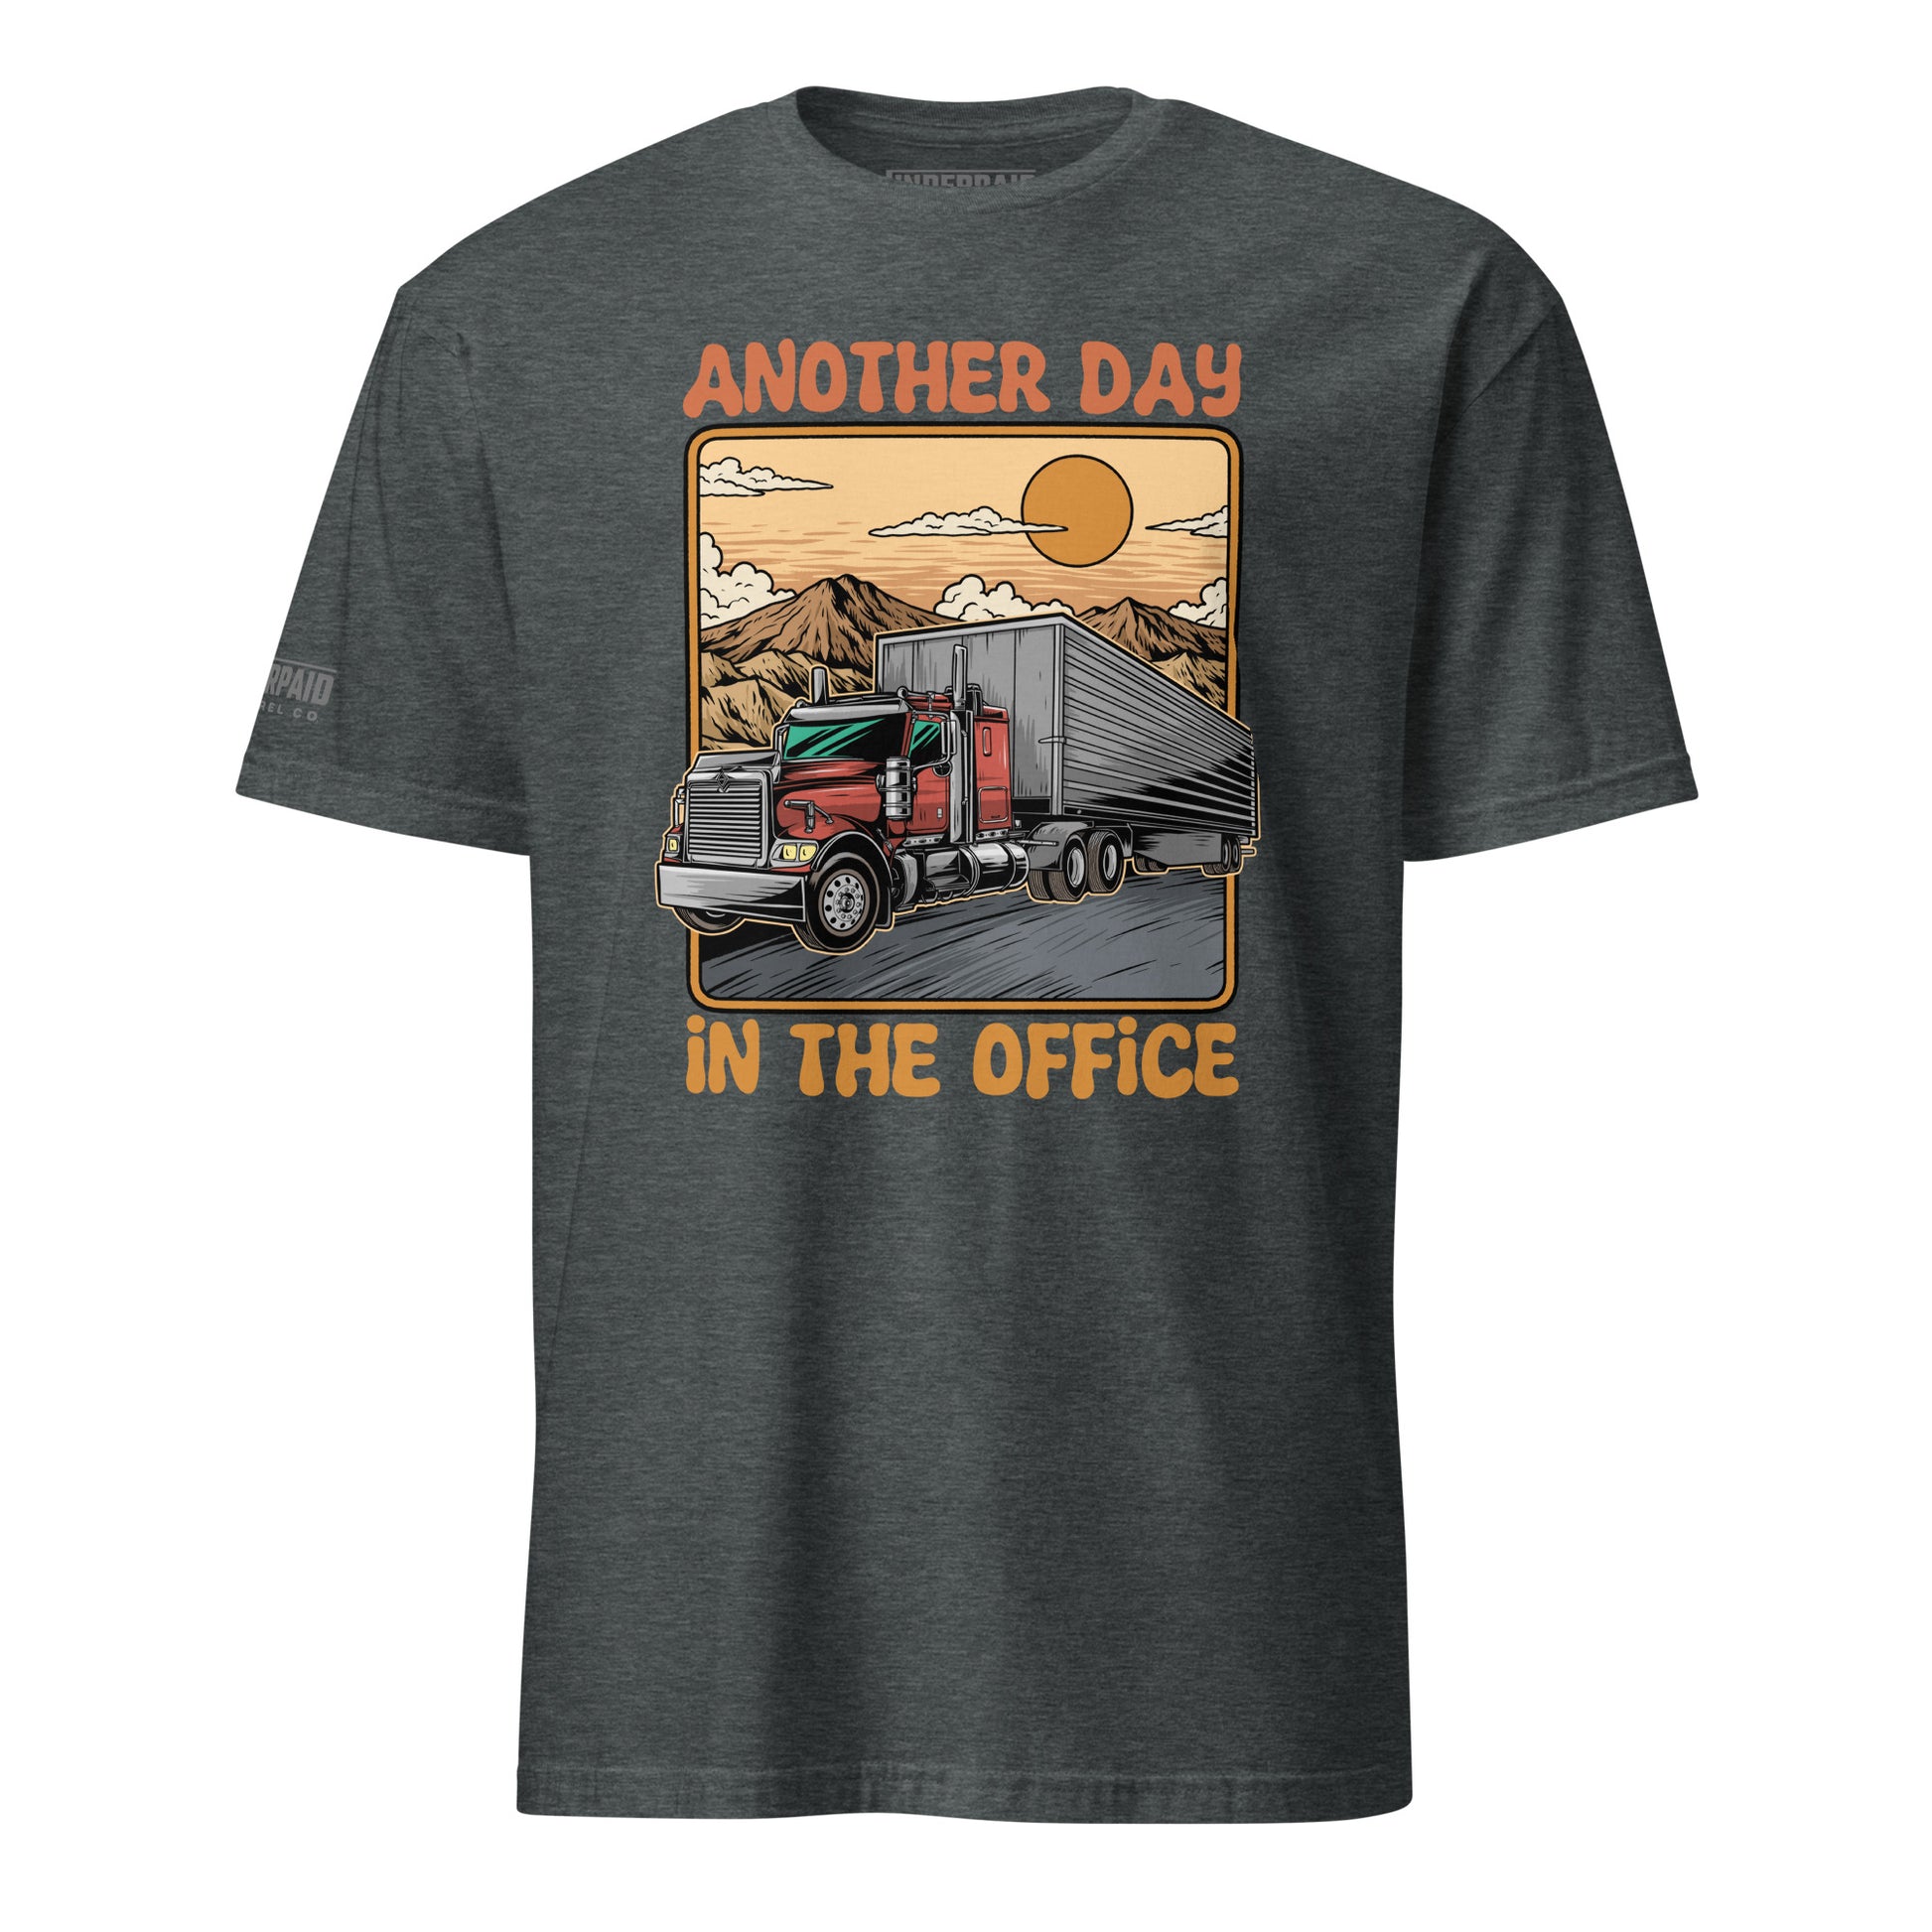 Day In The Office short sleeve graphic tee featuring full color design